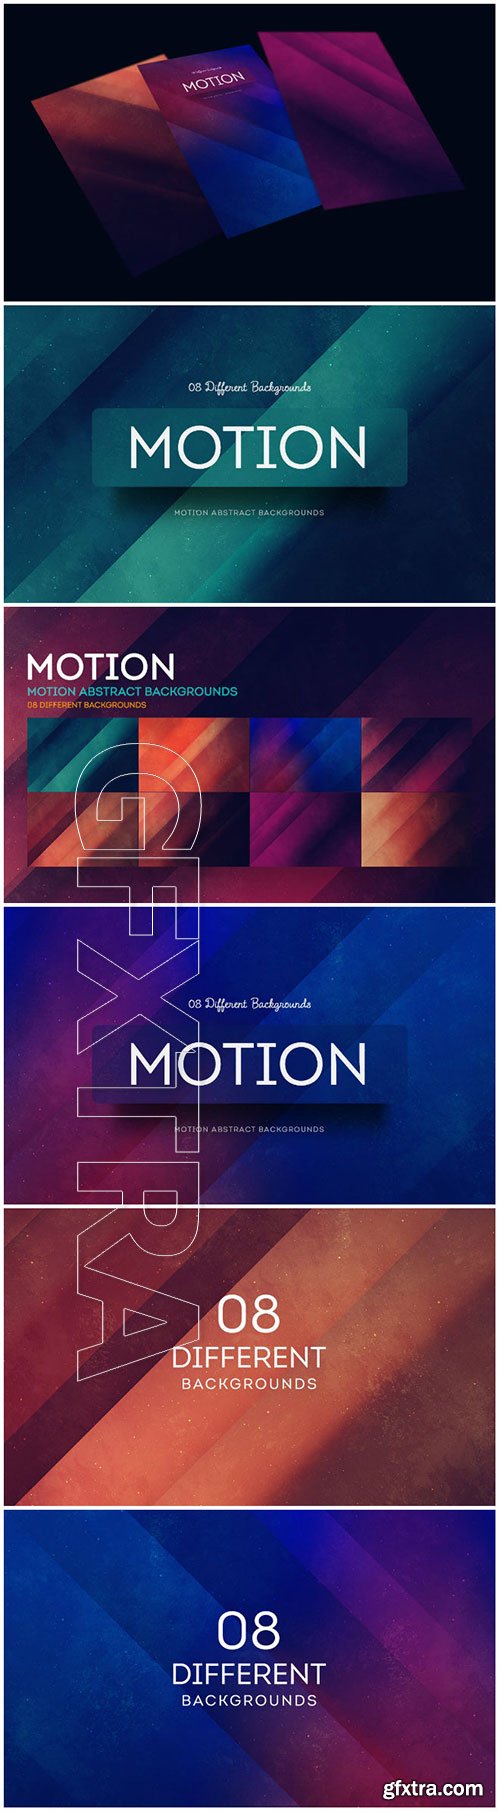 Motion Abstract Backgrounds